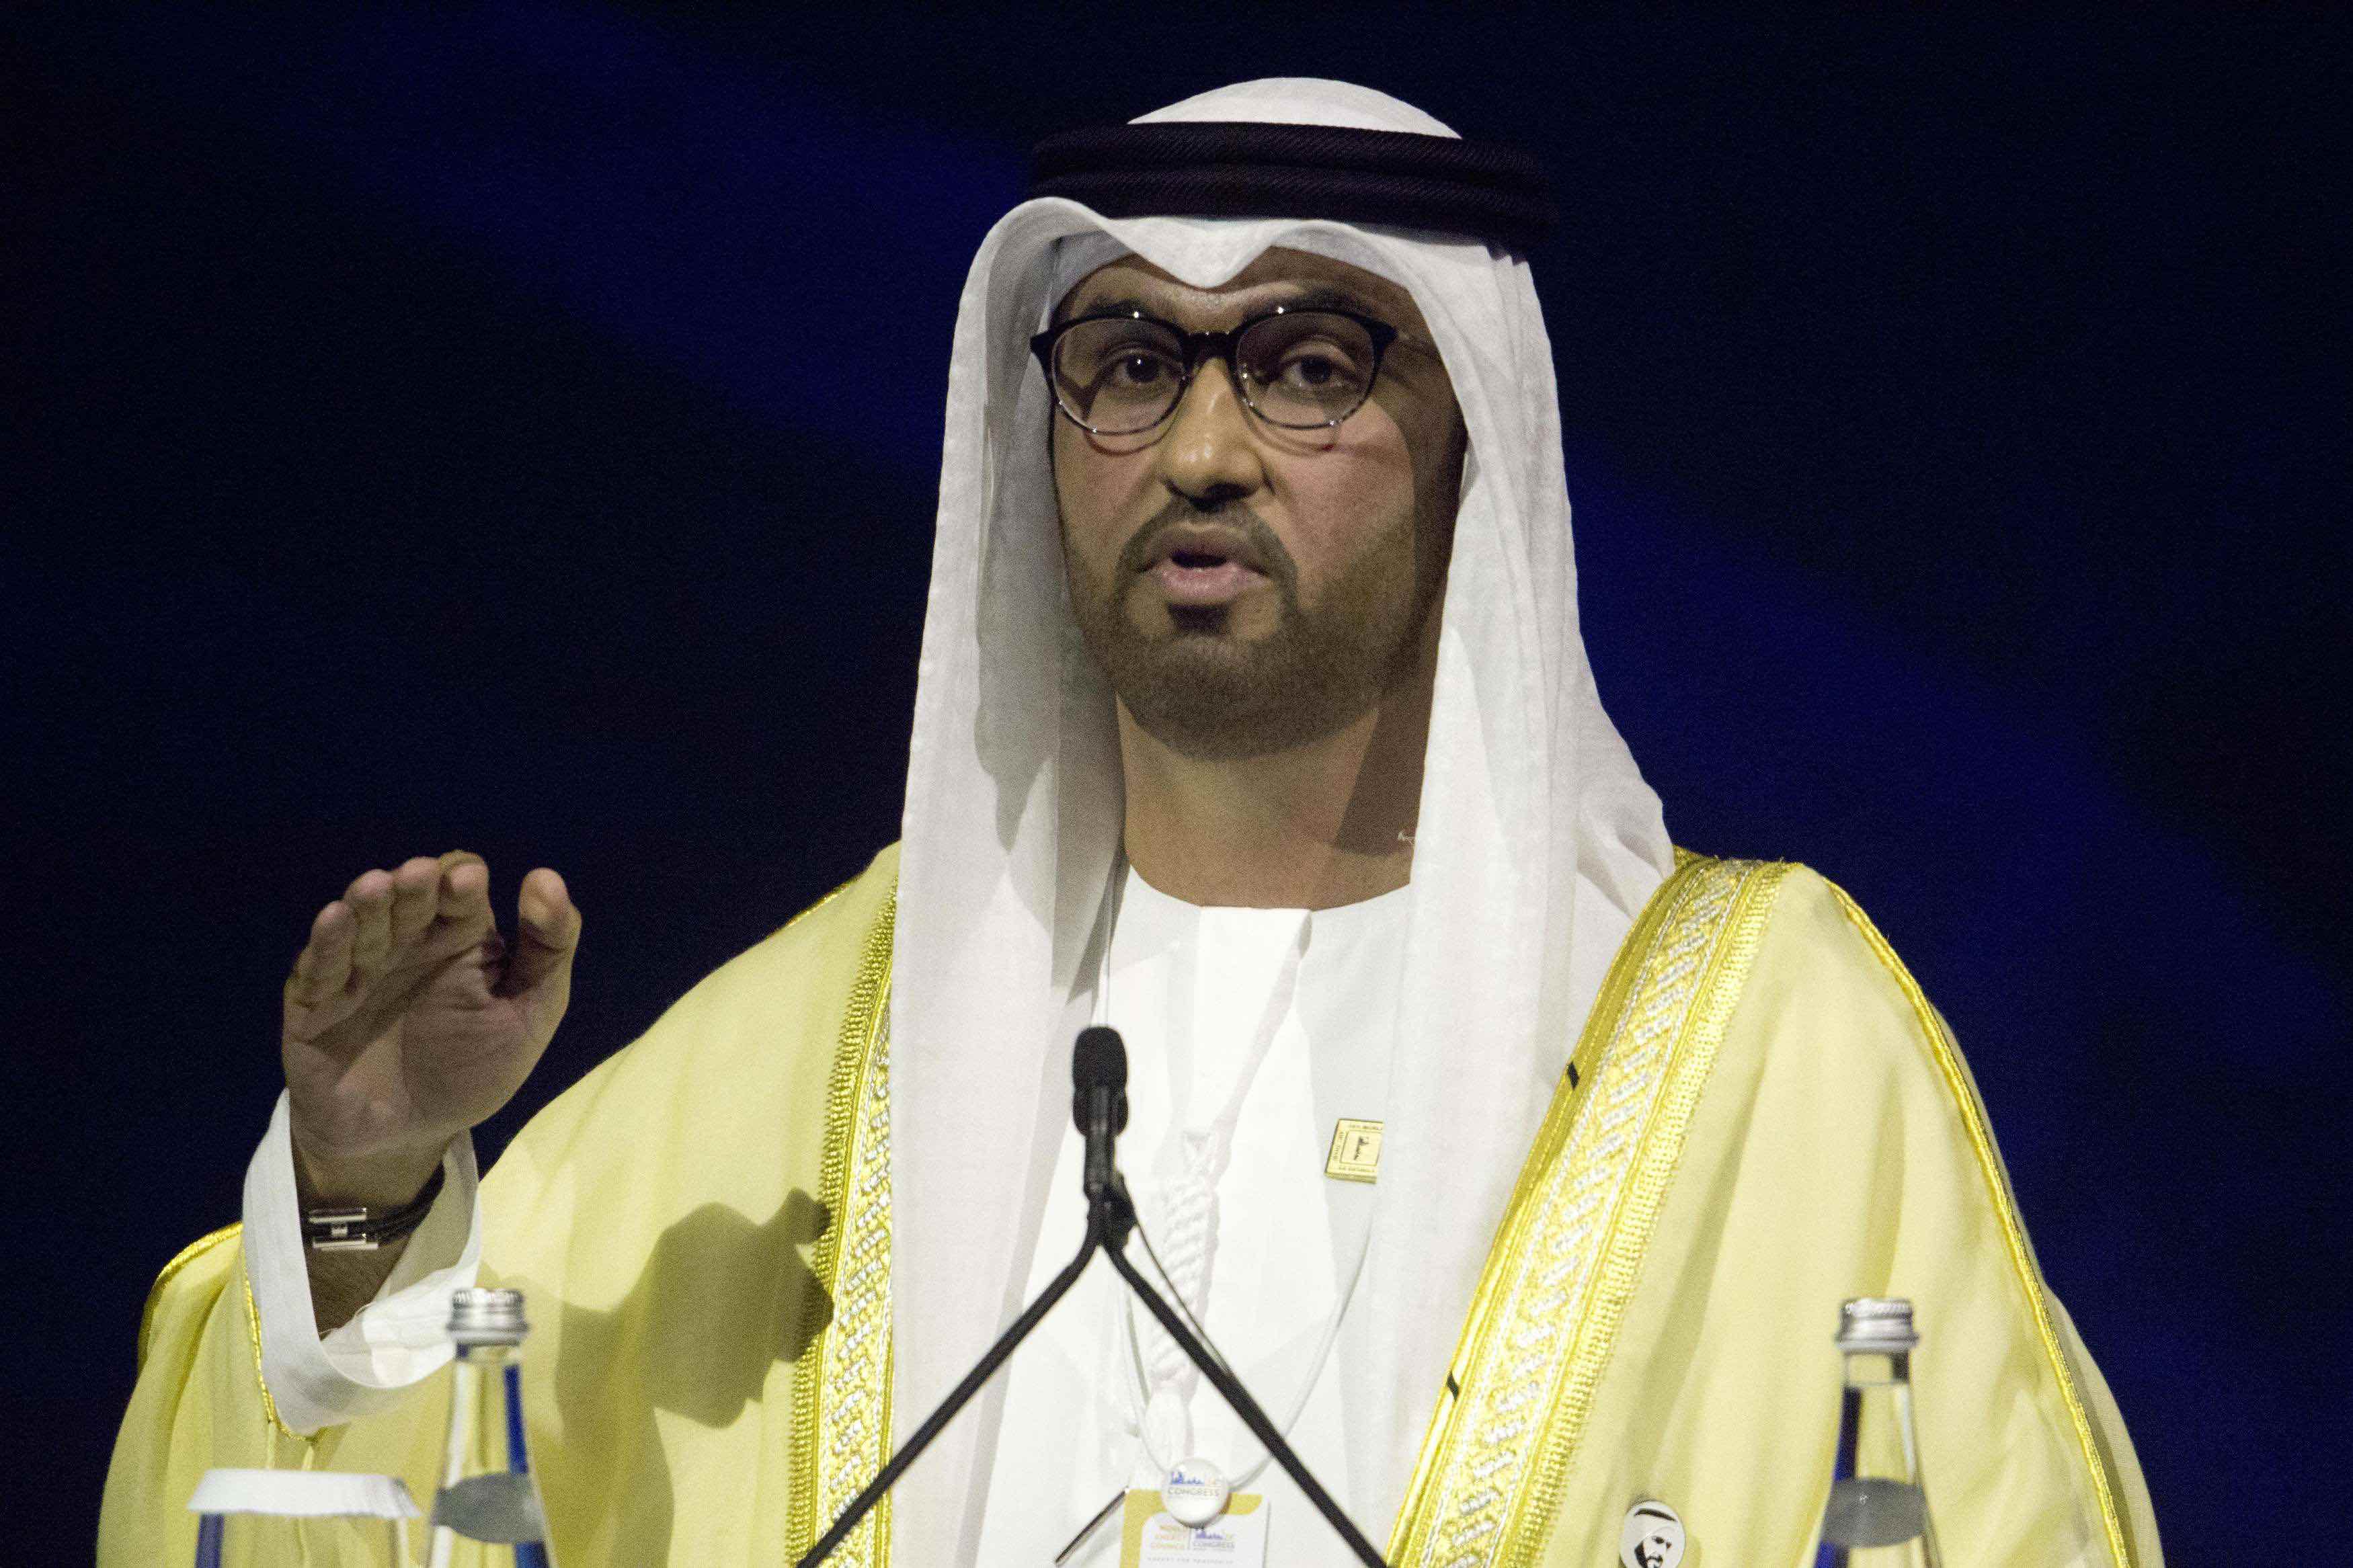 Sultan Ahmed al-Jaber, the Emirati minister of state and the CEO of Abu Dhabi's state-run Abu Dhabi National Oil Co